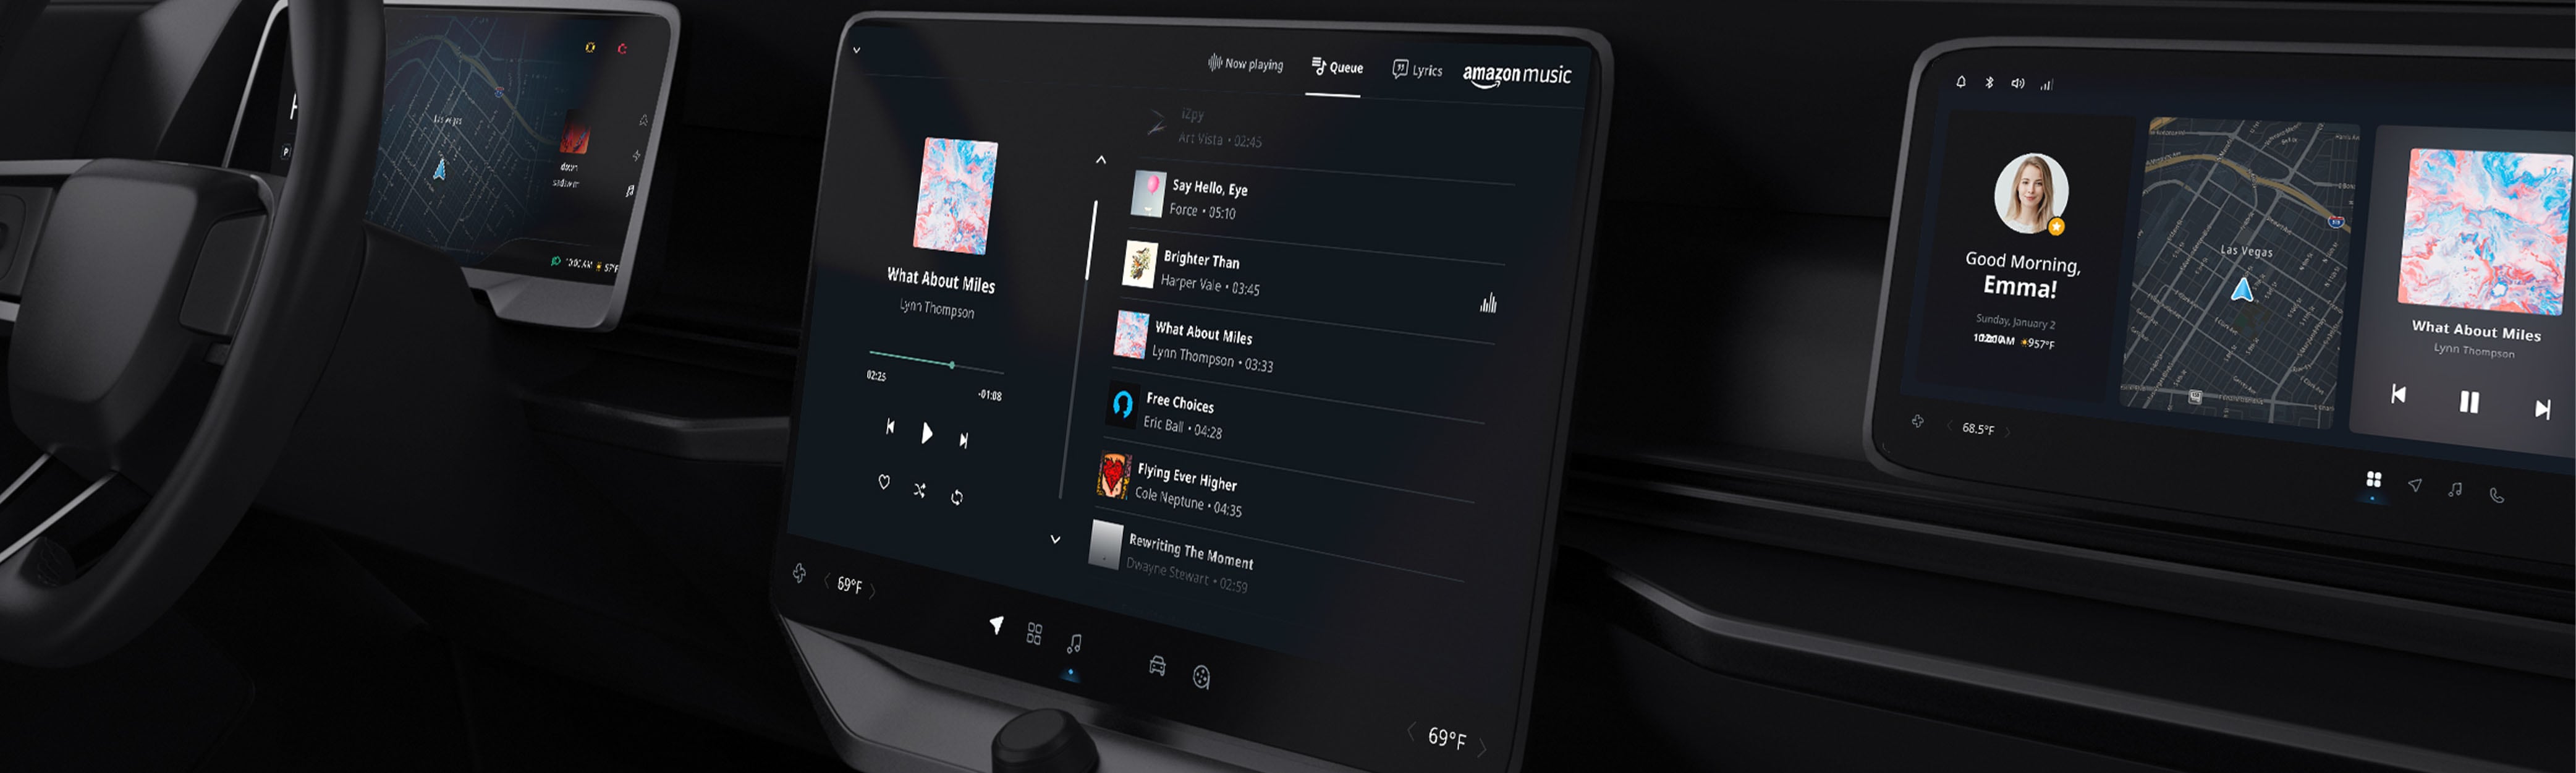 TomTom's digital cockpit platform now comes with Amazon Music out of the box